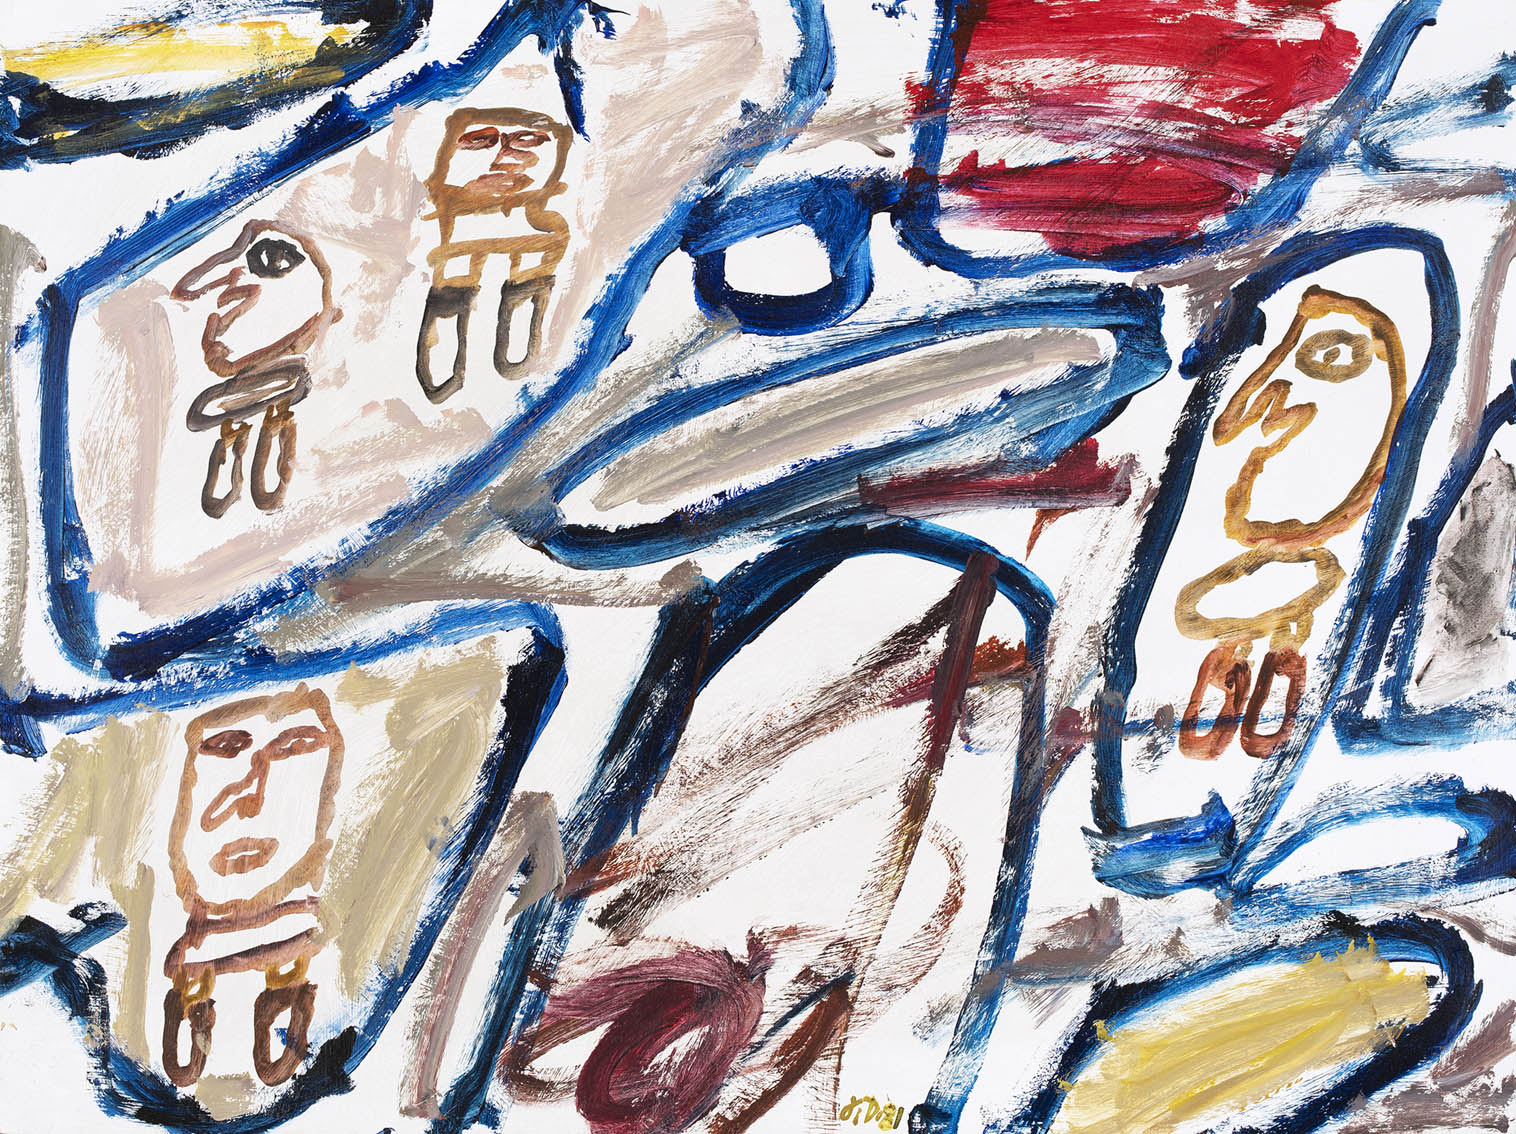 oeuvres Site avec 4 personnages Jean Dubuffet